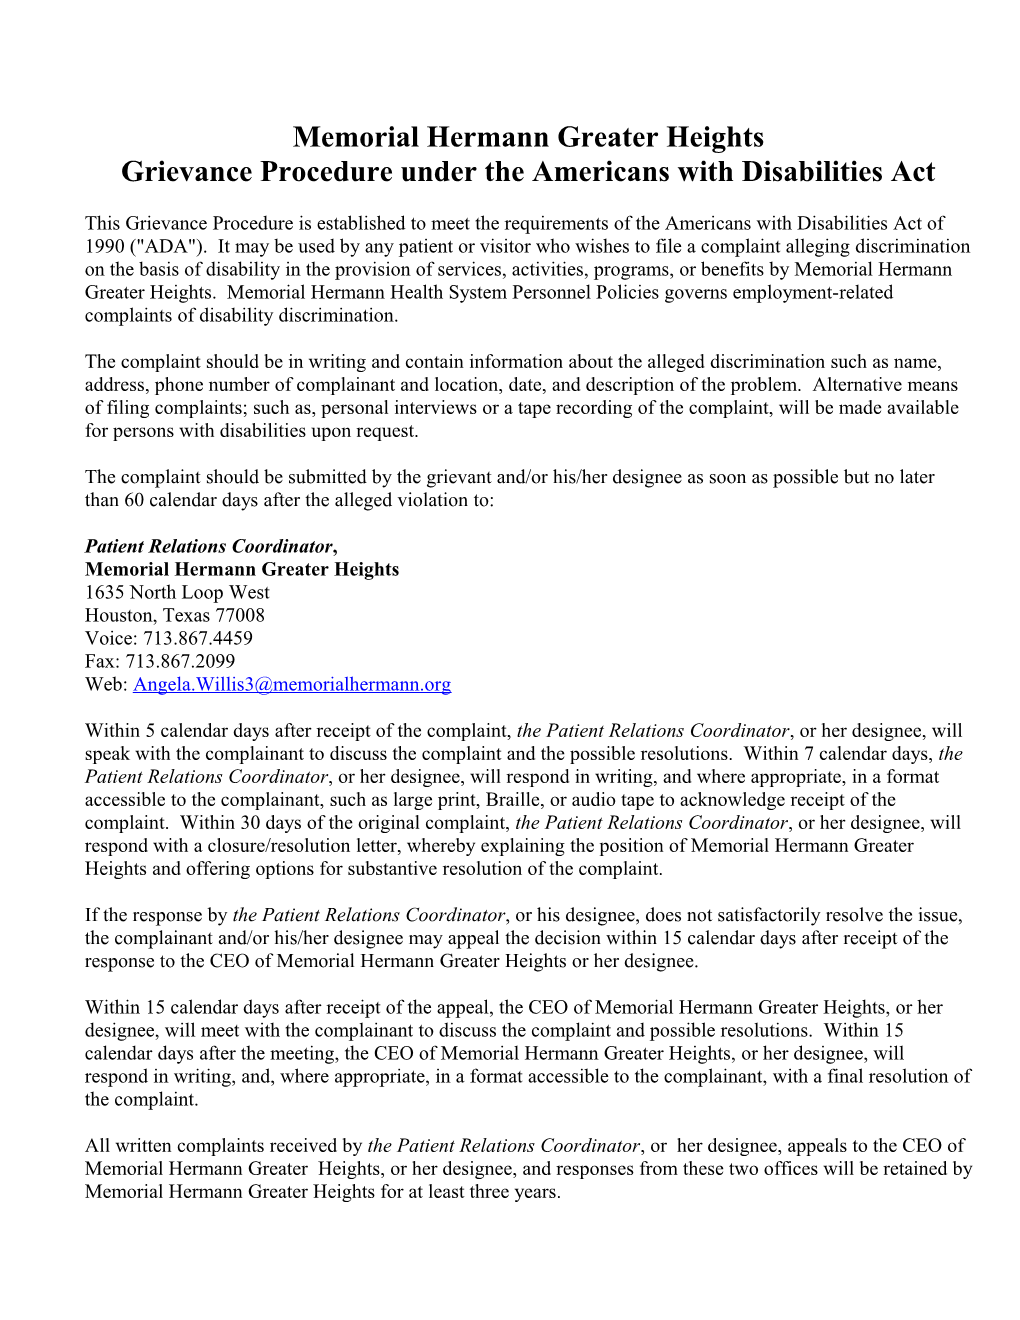 Notice Under the Americans Withdisabilities Act